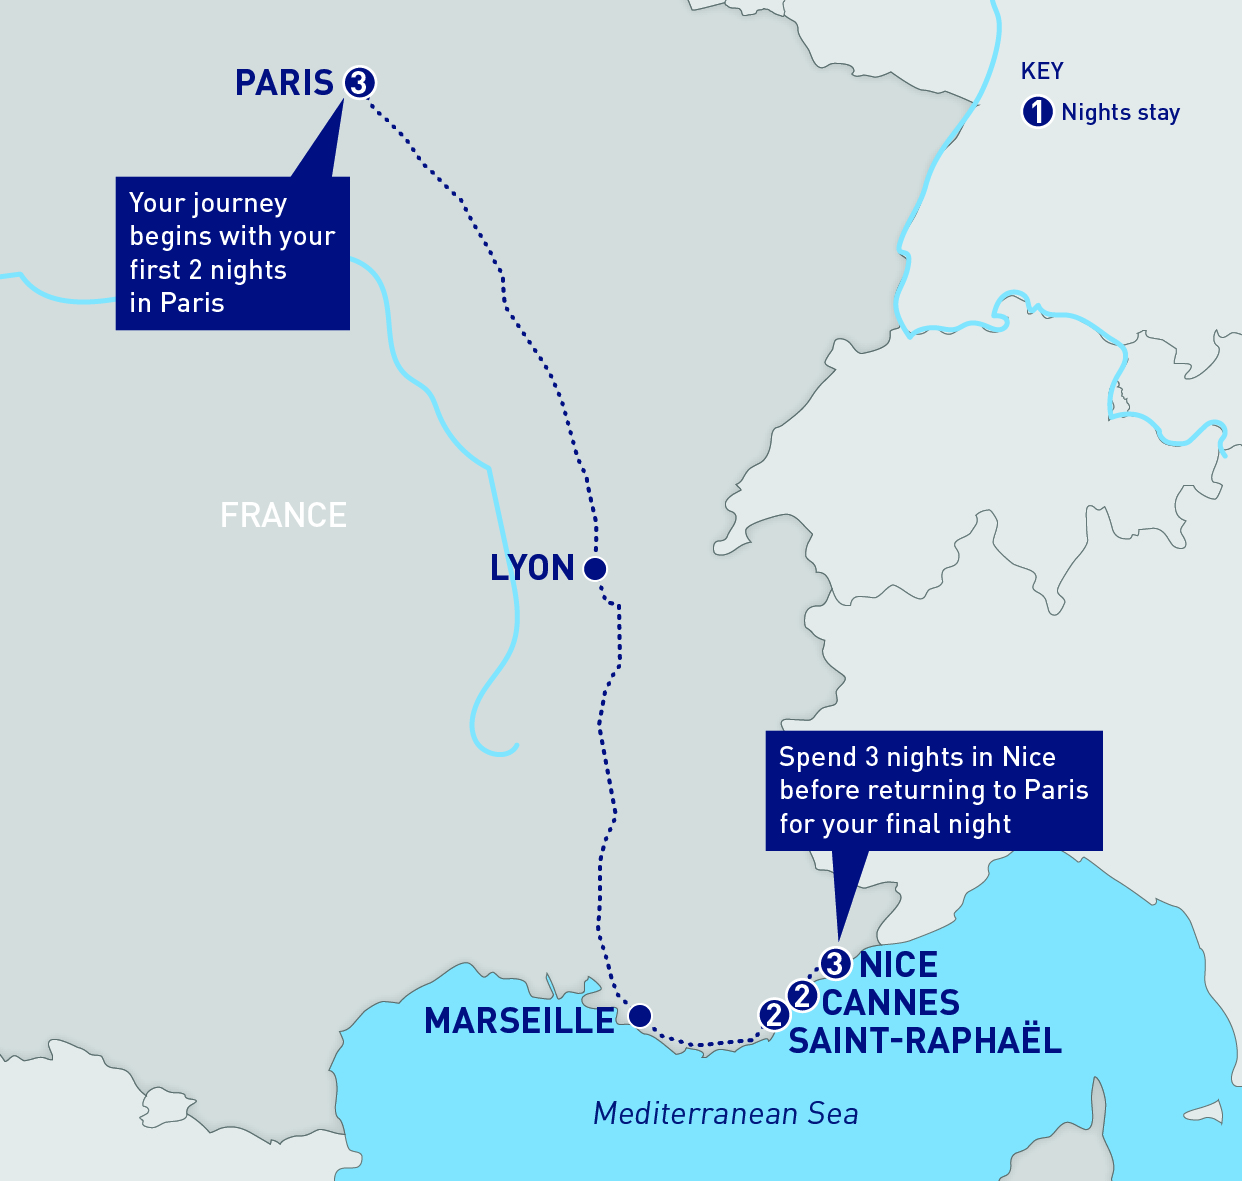 Itinerary mapped out from Paris to Nice